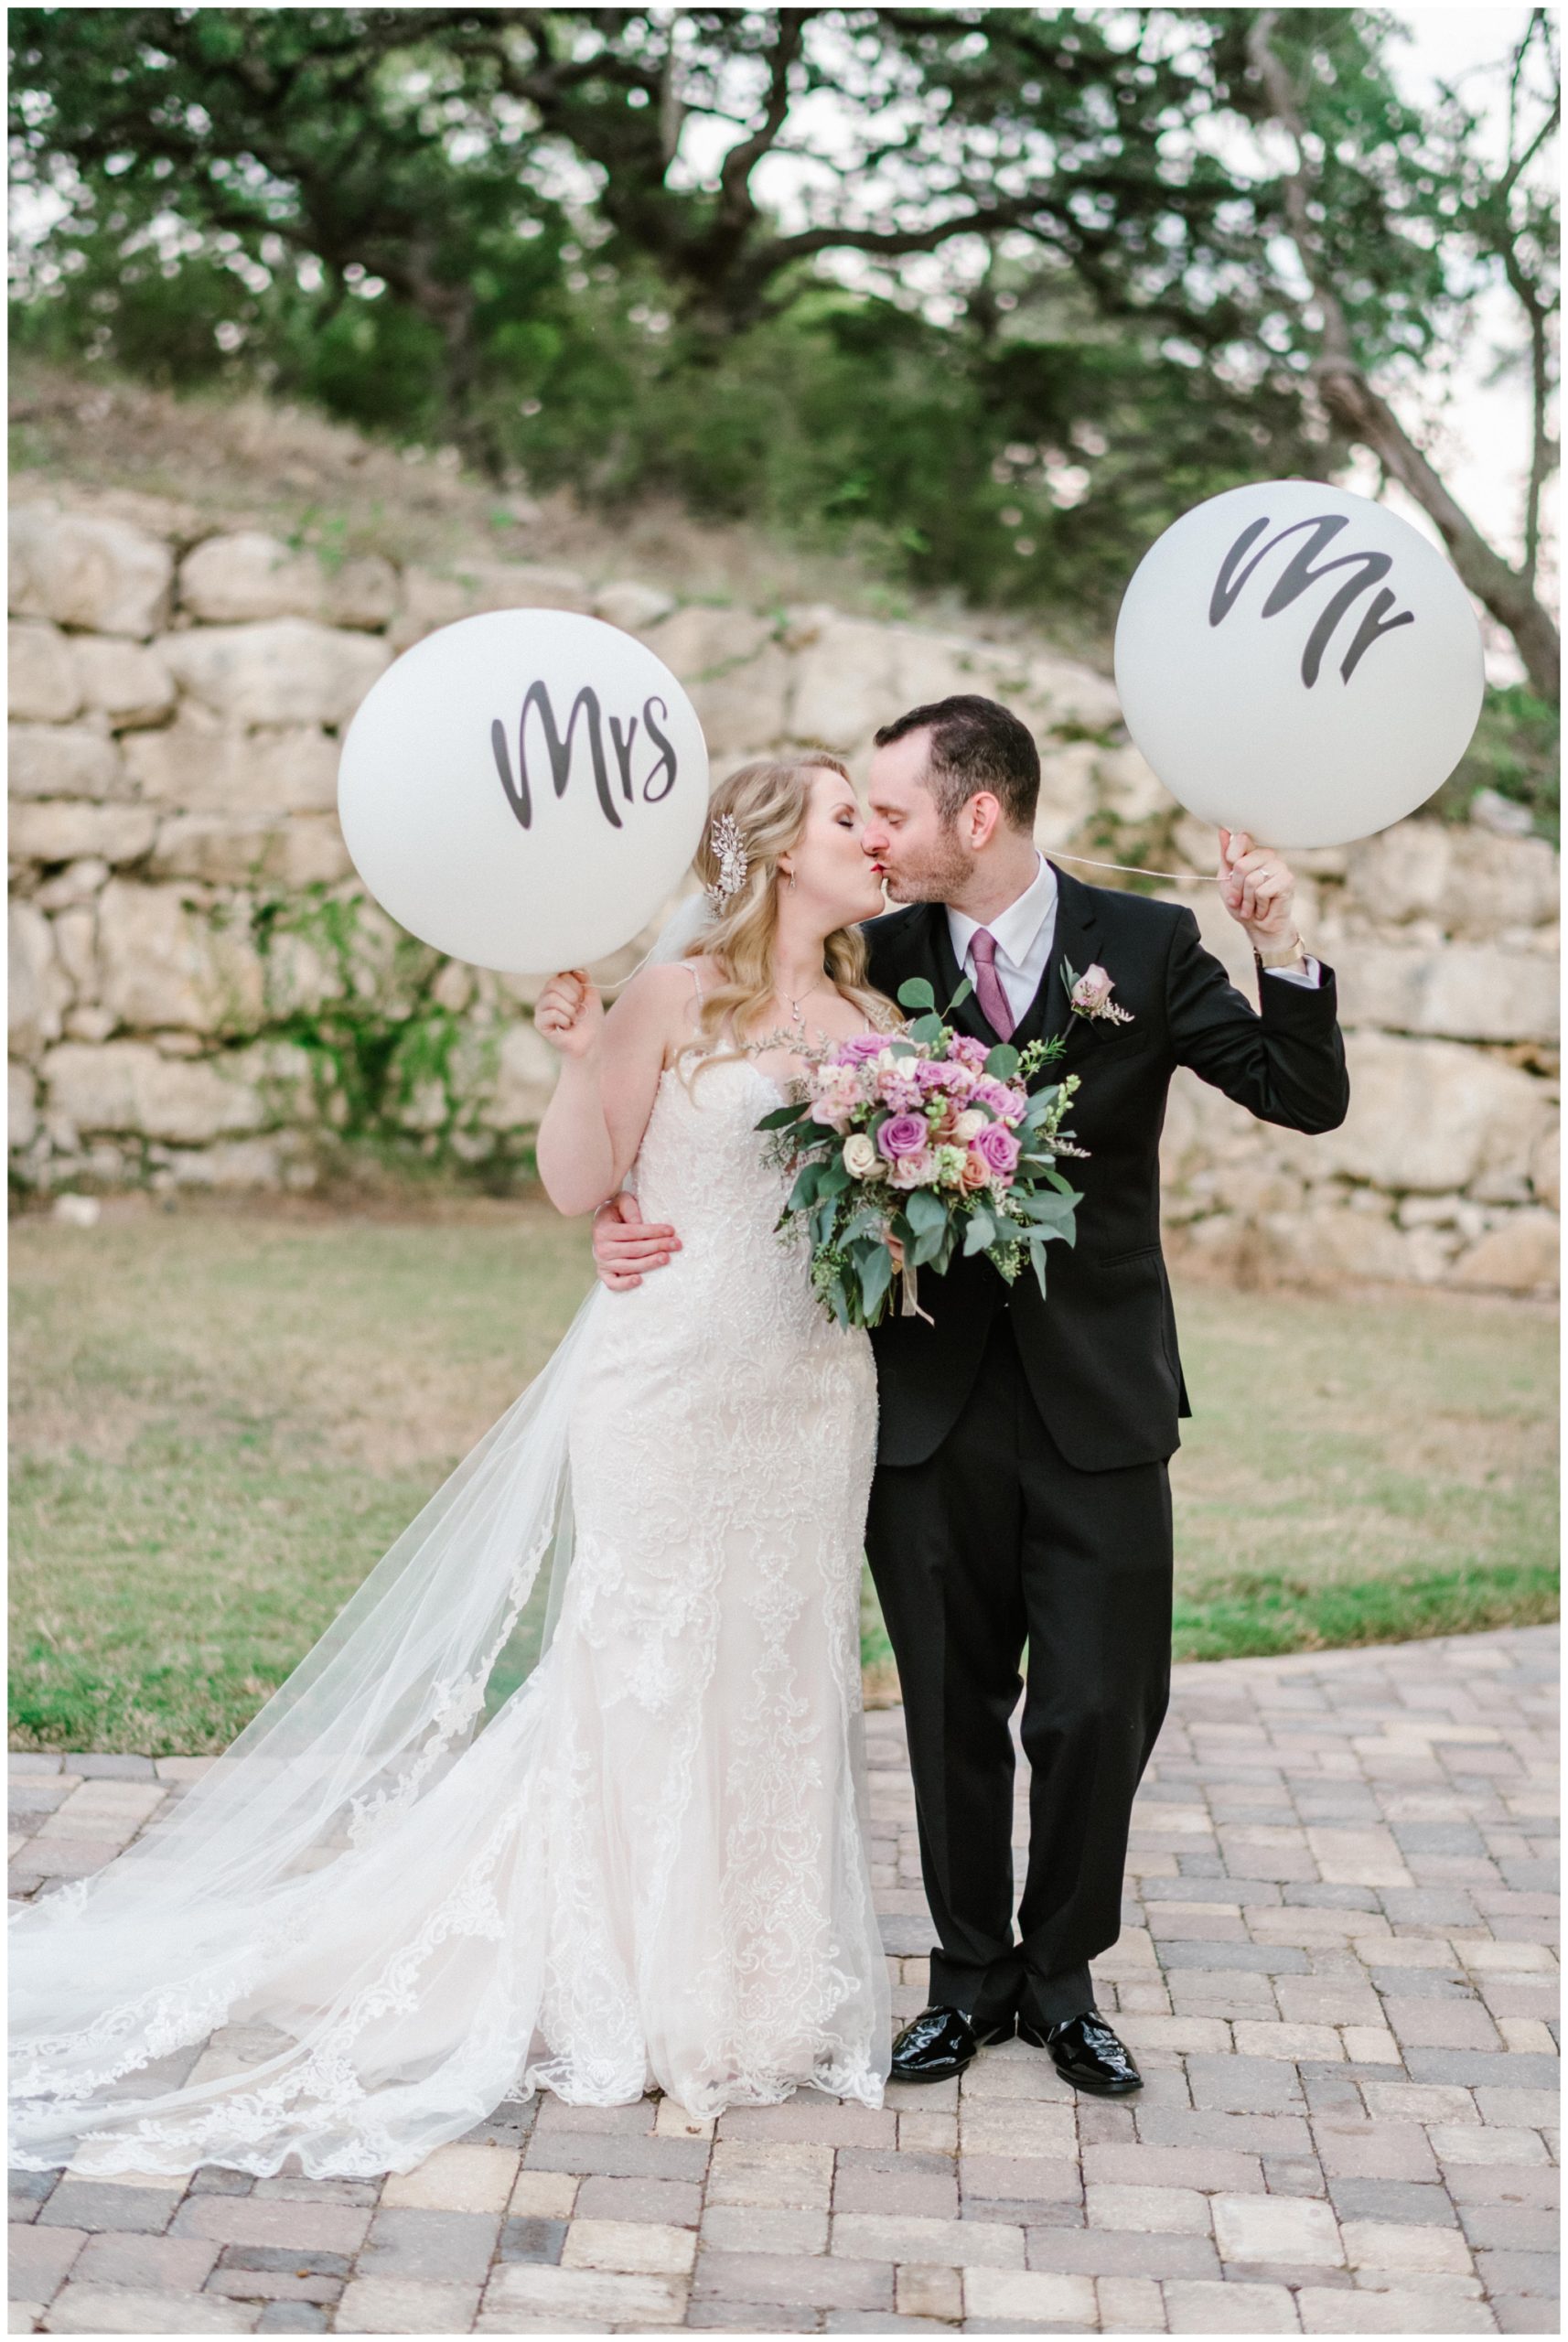 Bride and groom with Mr. and Mrs. balloons 